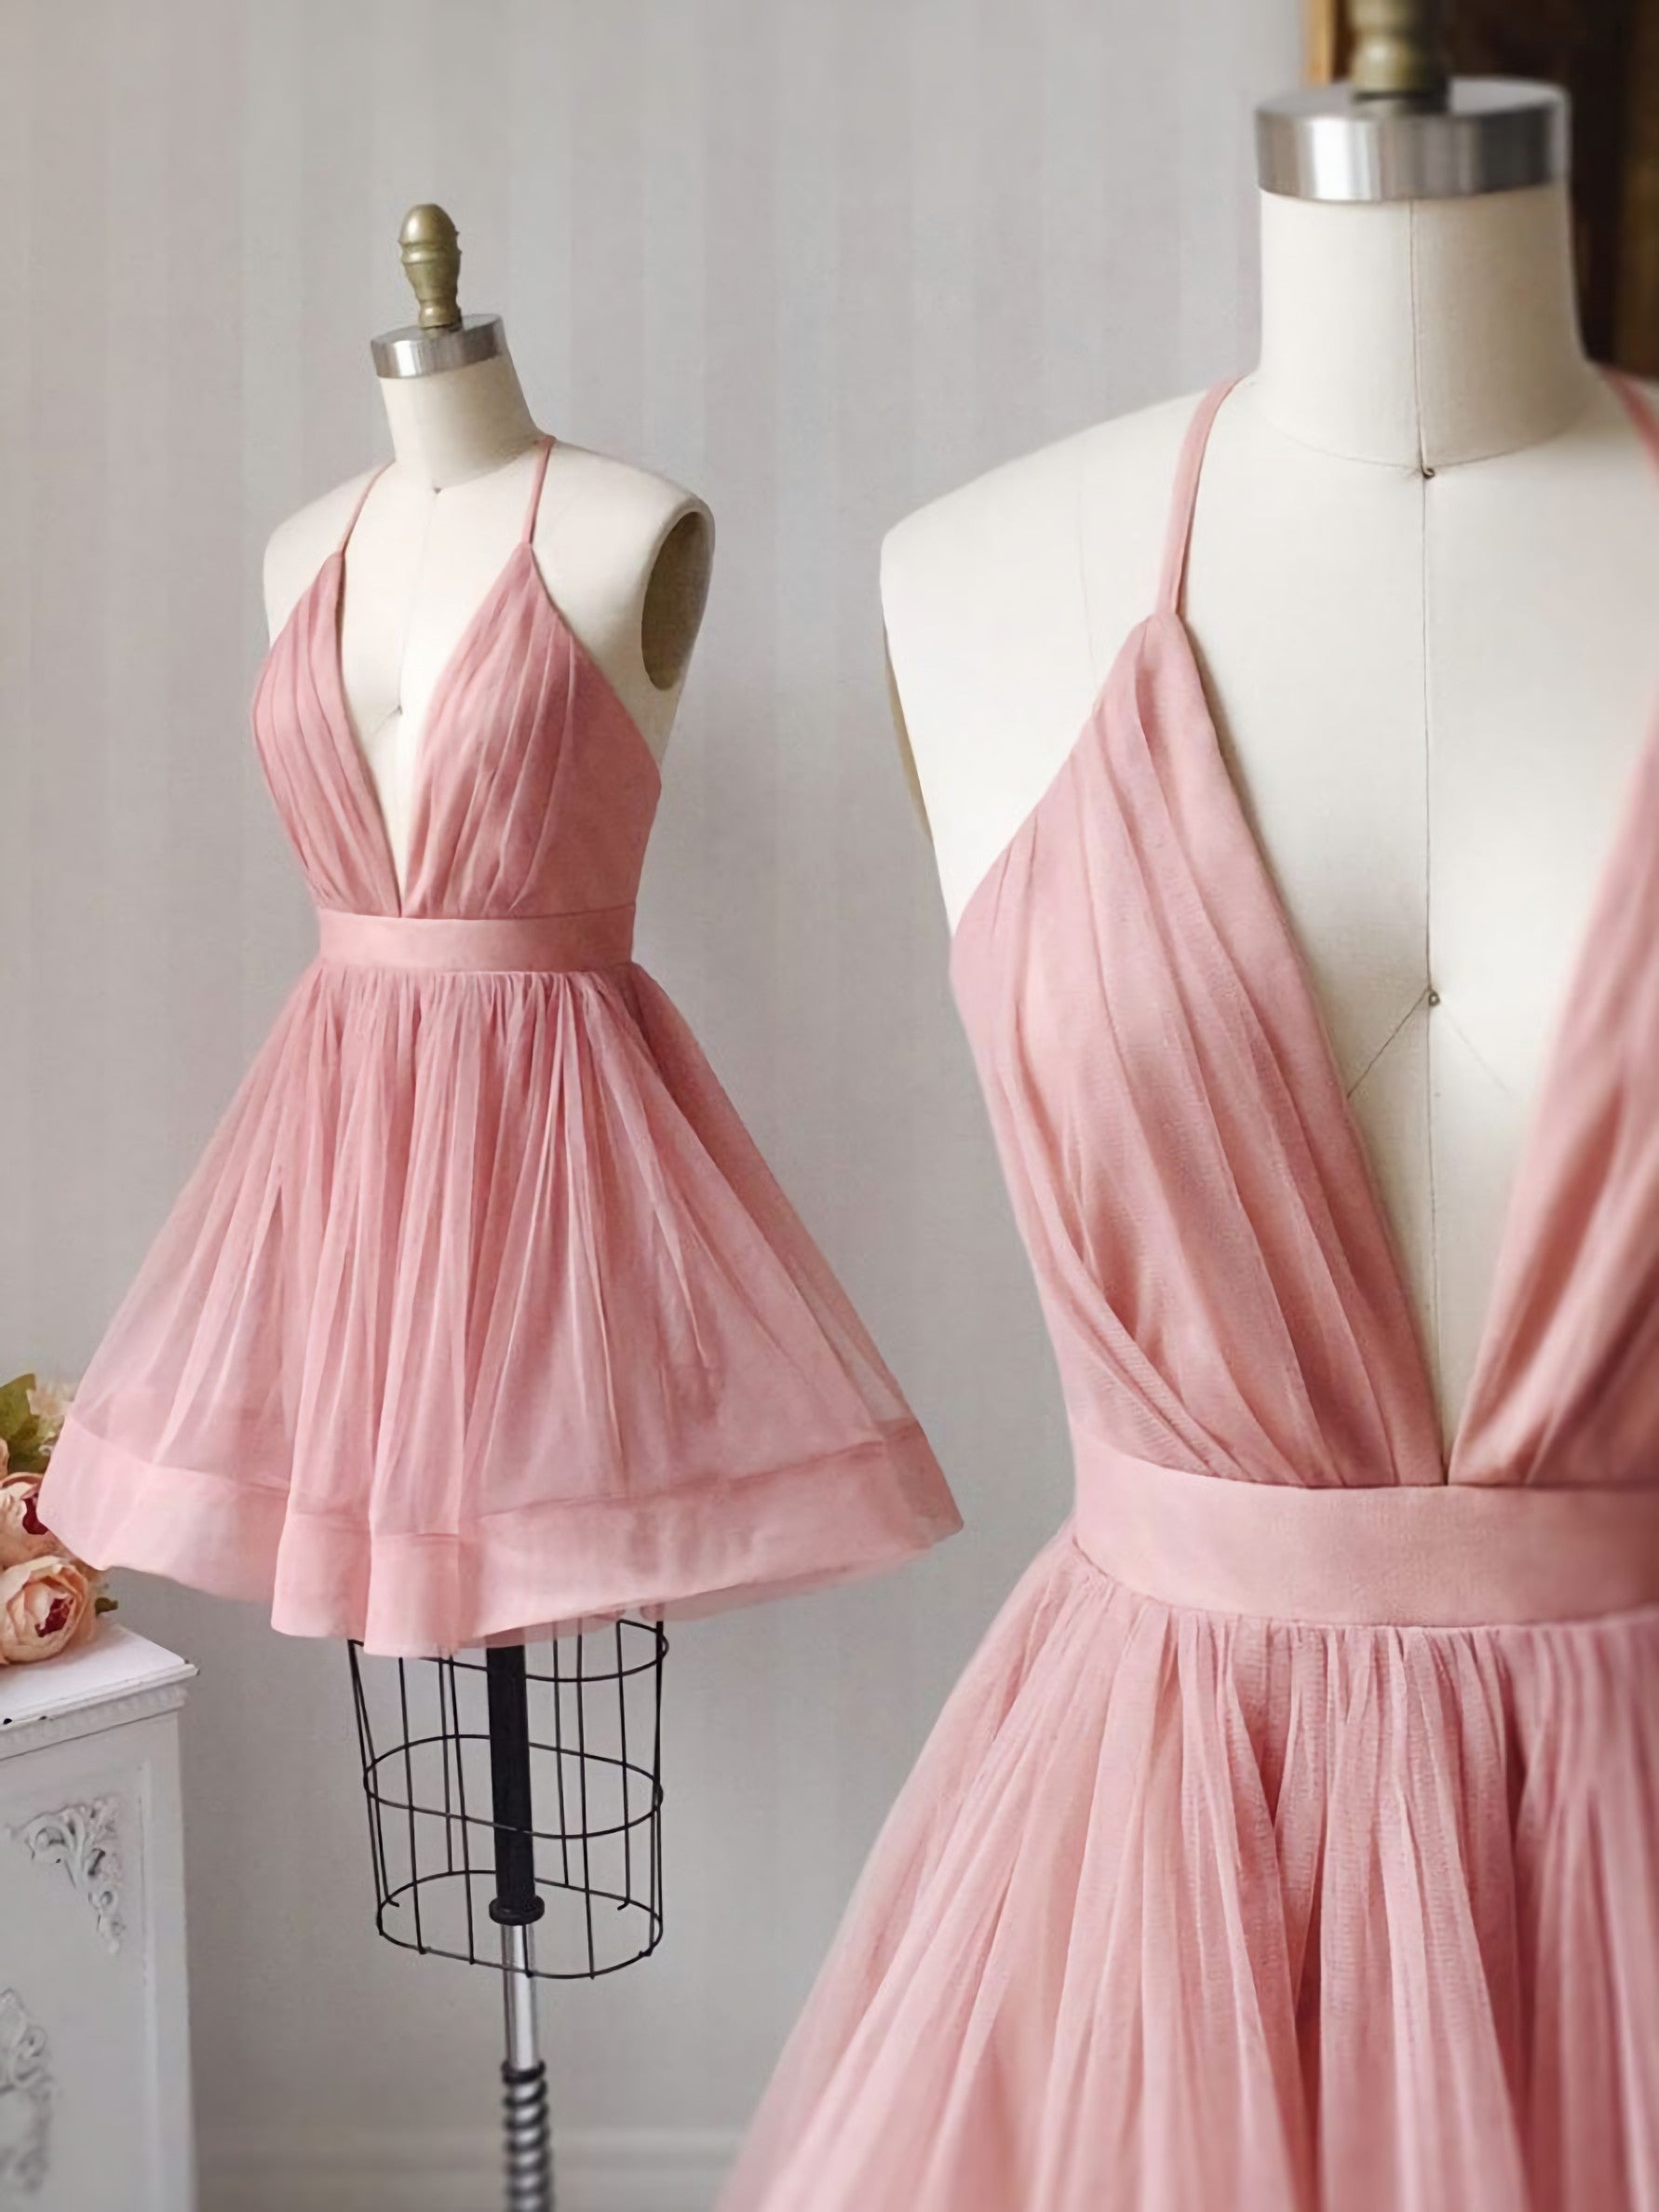 Homecoming Dresses Business Casual Outfits, Simple Pink Tulle Short Prom Dress, Pink Cocktail Dress